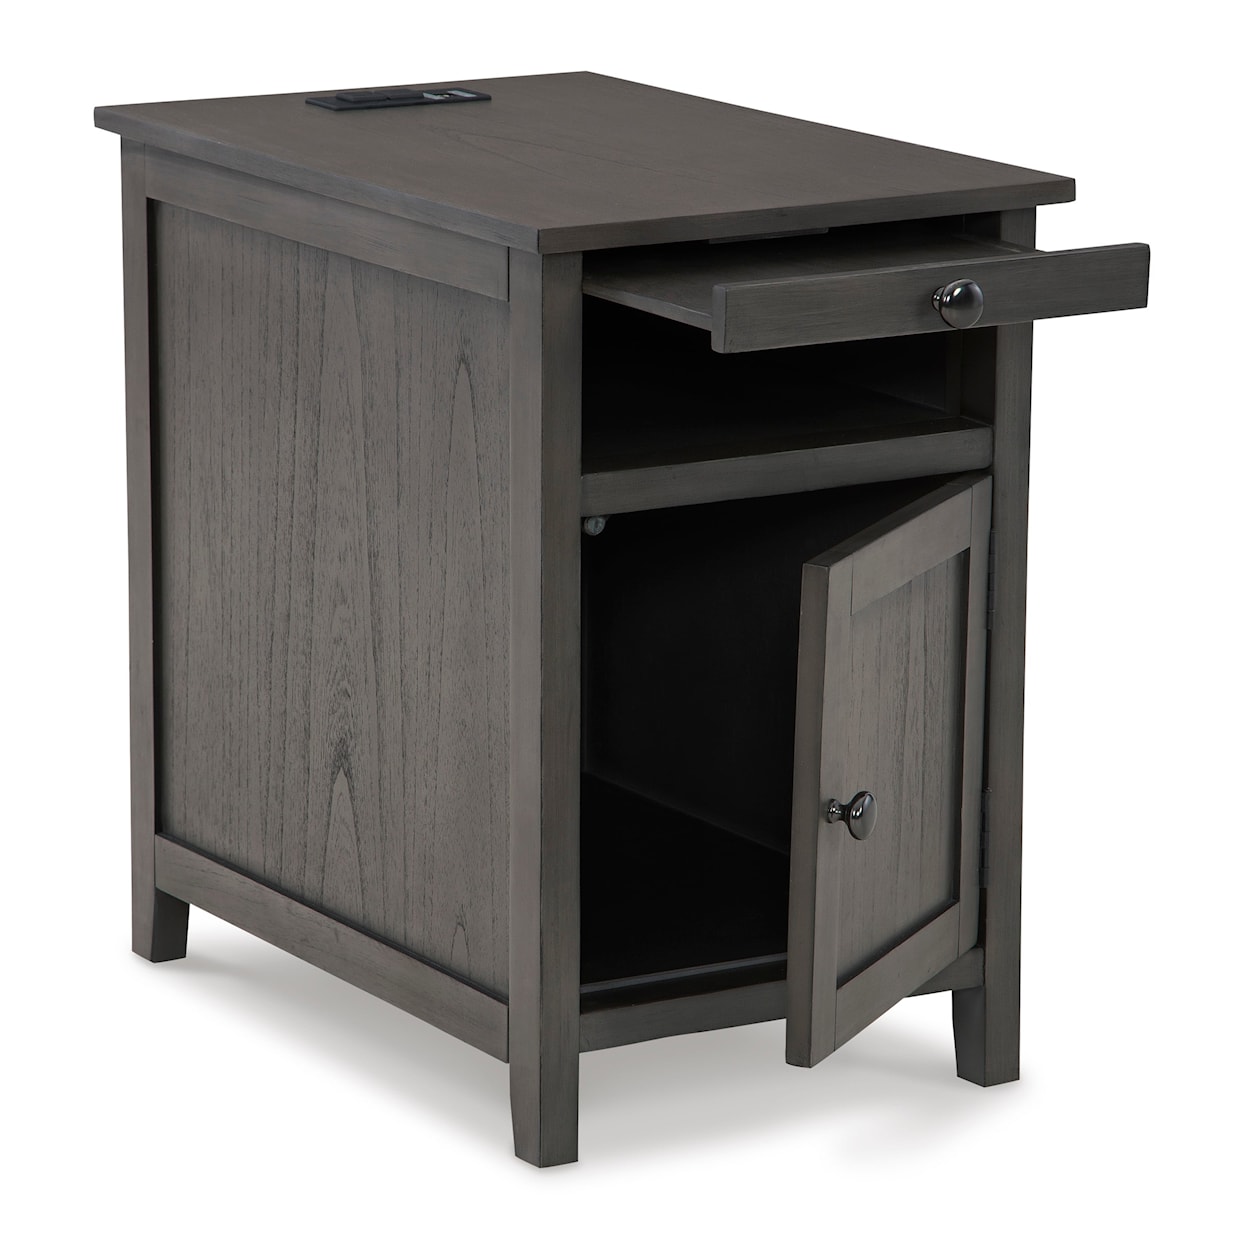 Ashley Furniture Signature Design Treytown Chairside End Table